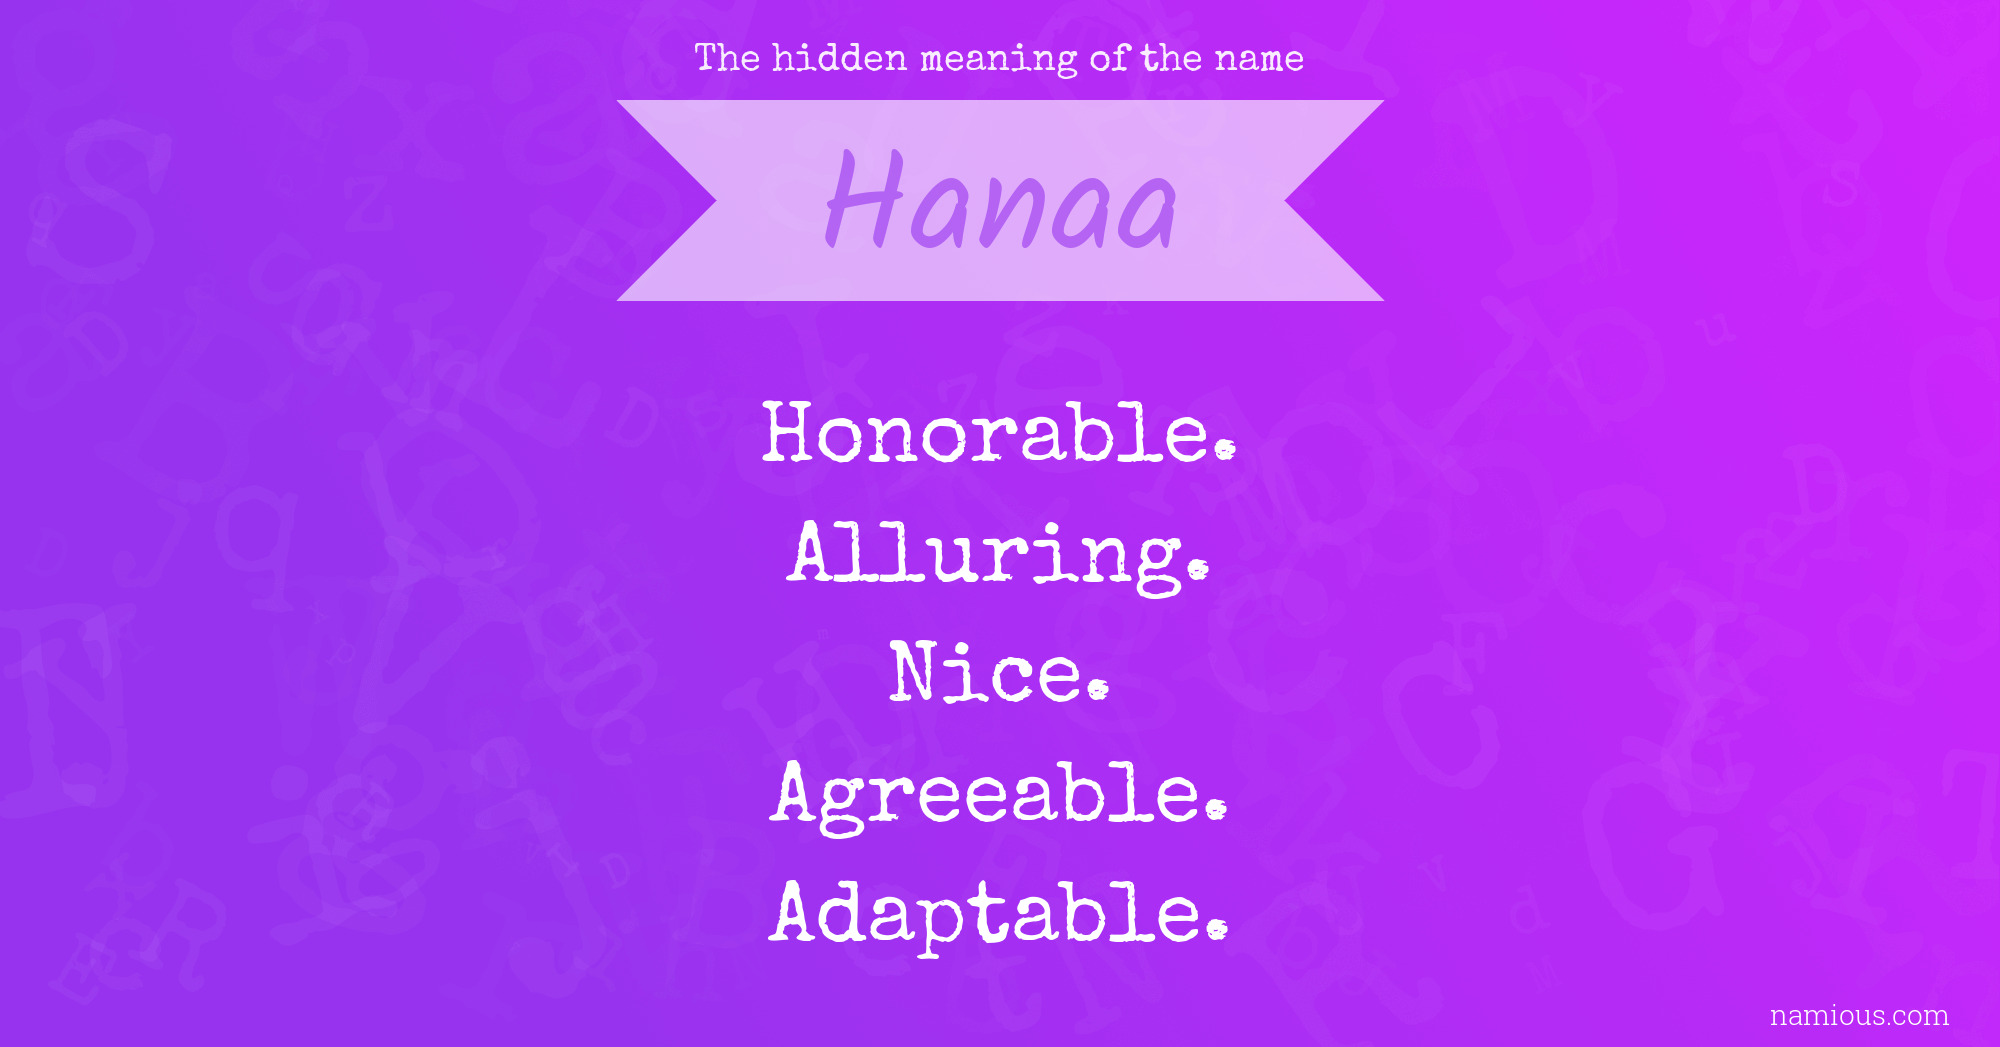 The hidden meaning of the name Hanaa